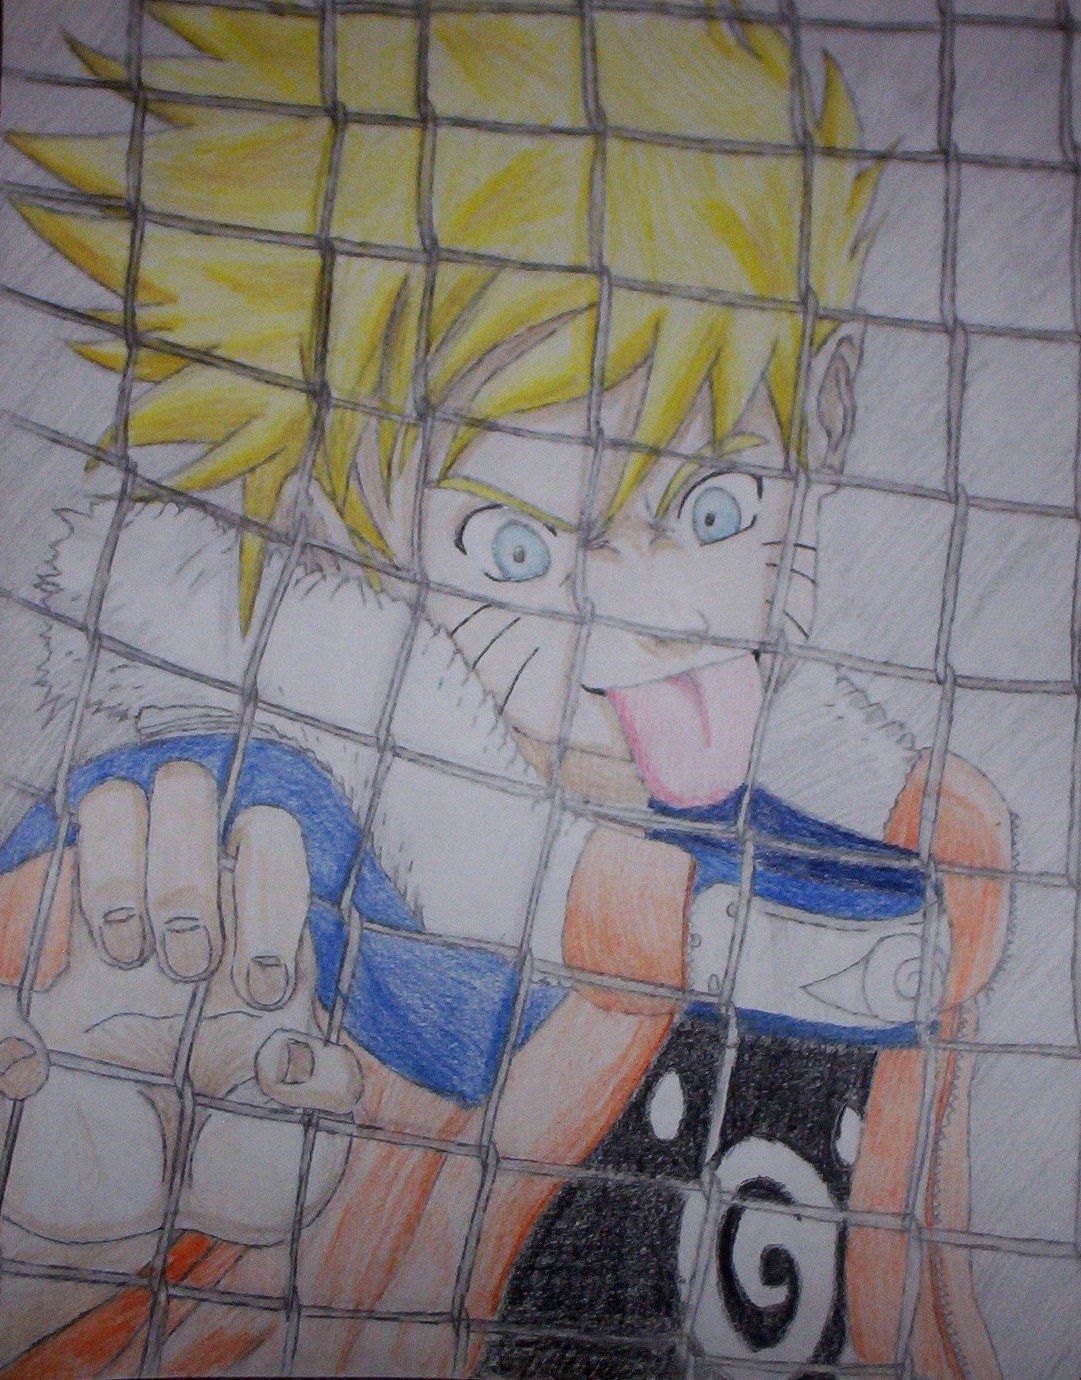 Naruto Behind the Fence by BGSGLGW1